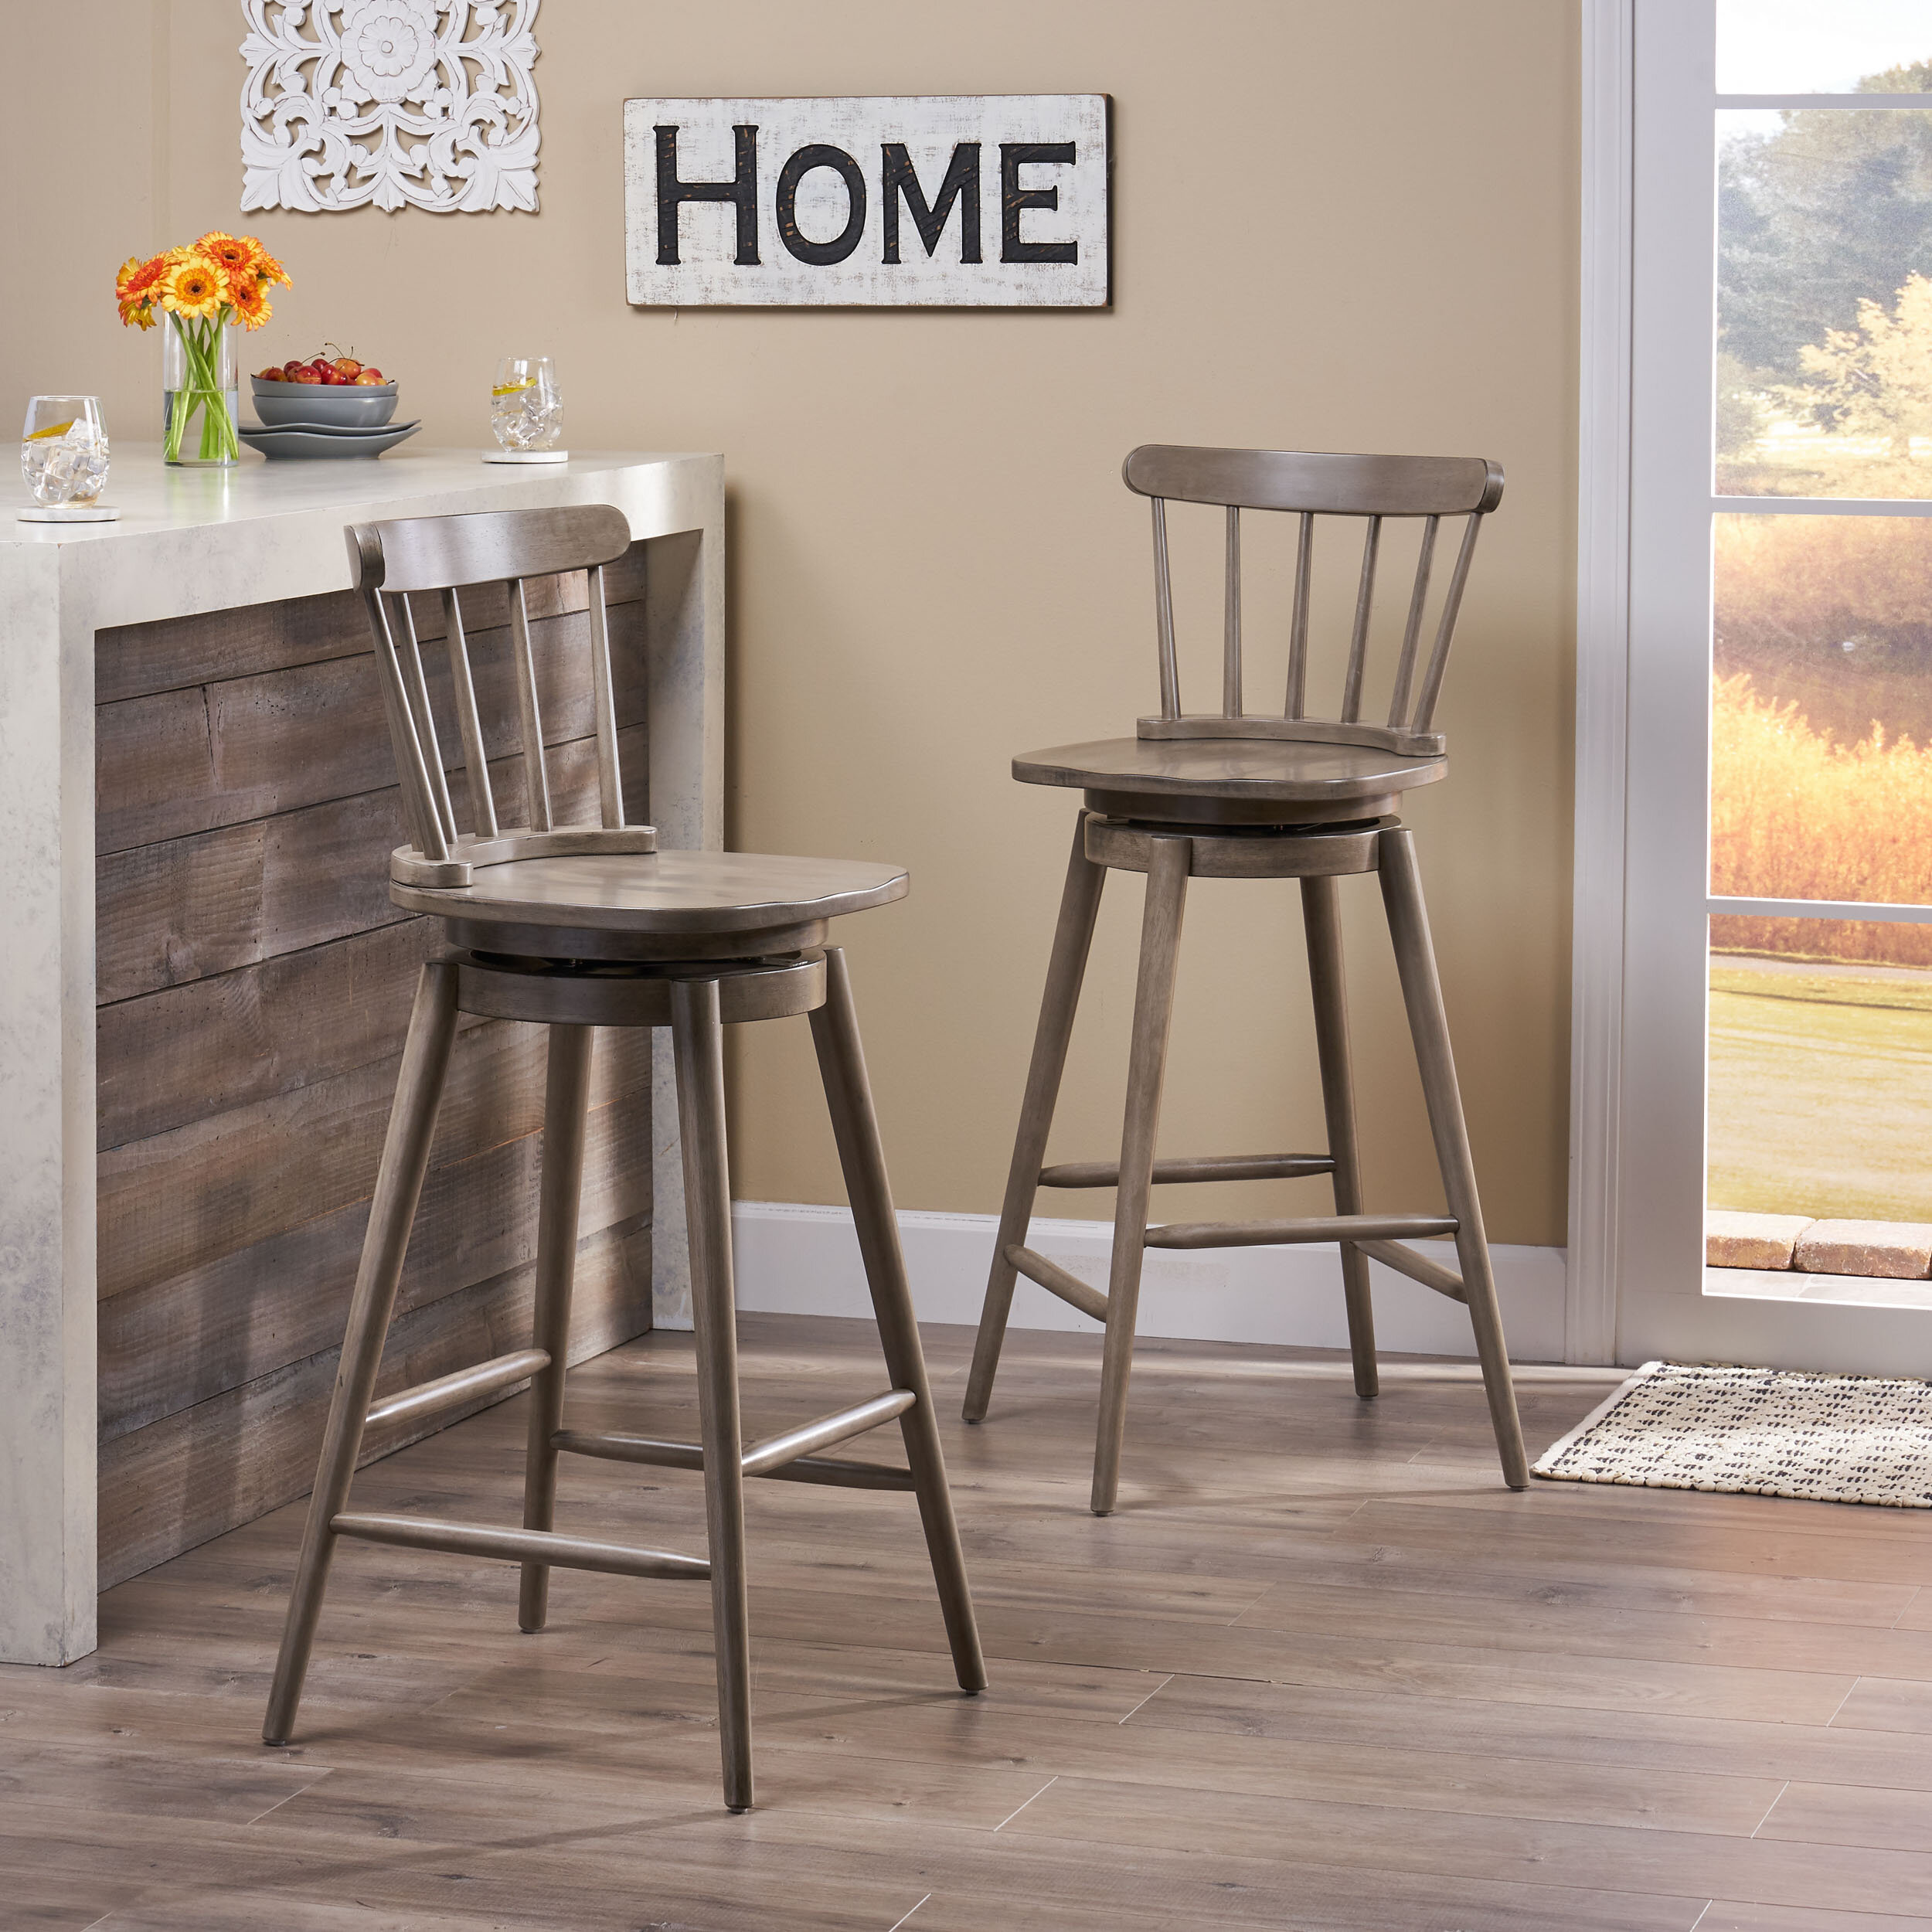 30 L7C1-4 Vermont Cushion Seat with Double-Ring Chrome Base Swivel Bar Stool by The Holland Bar Stool Company